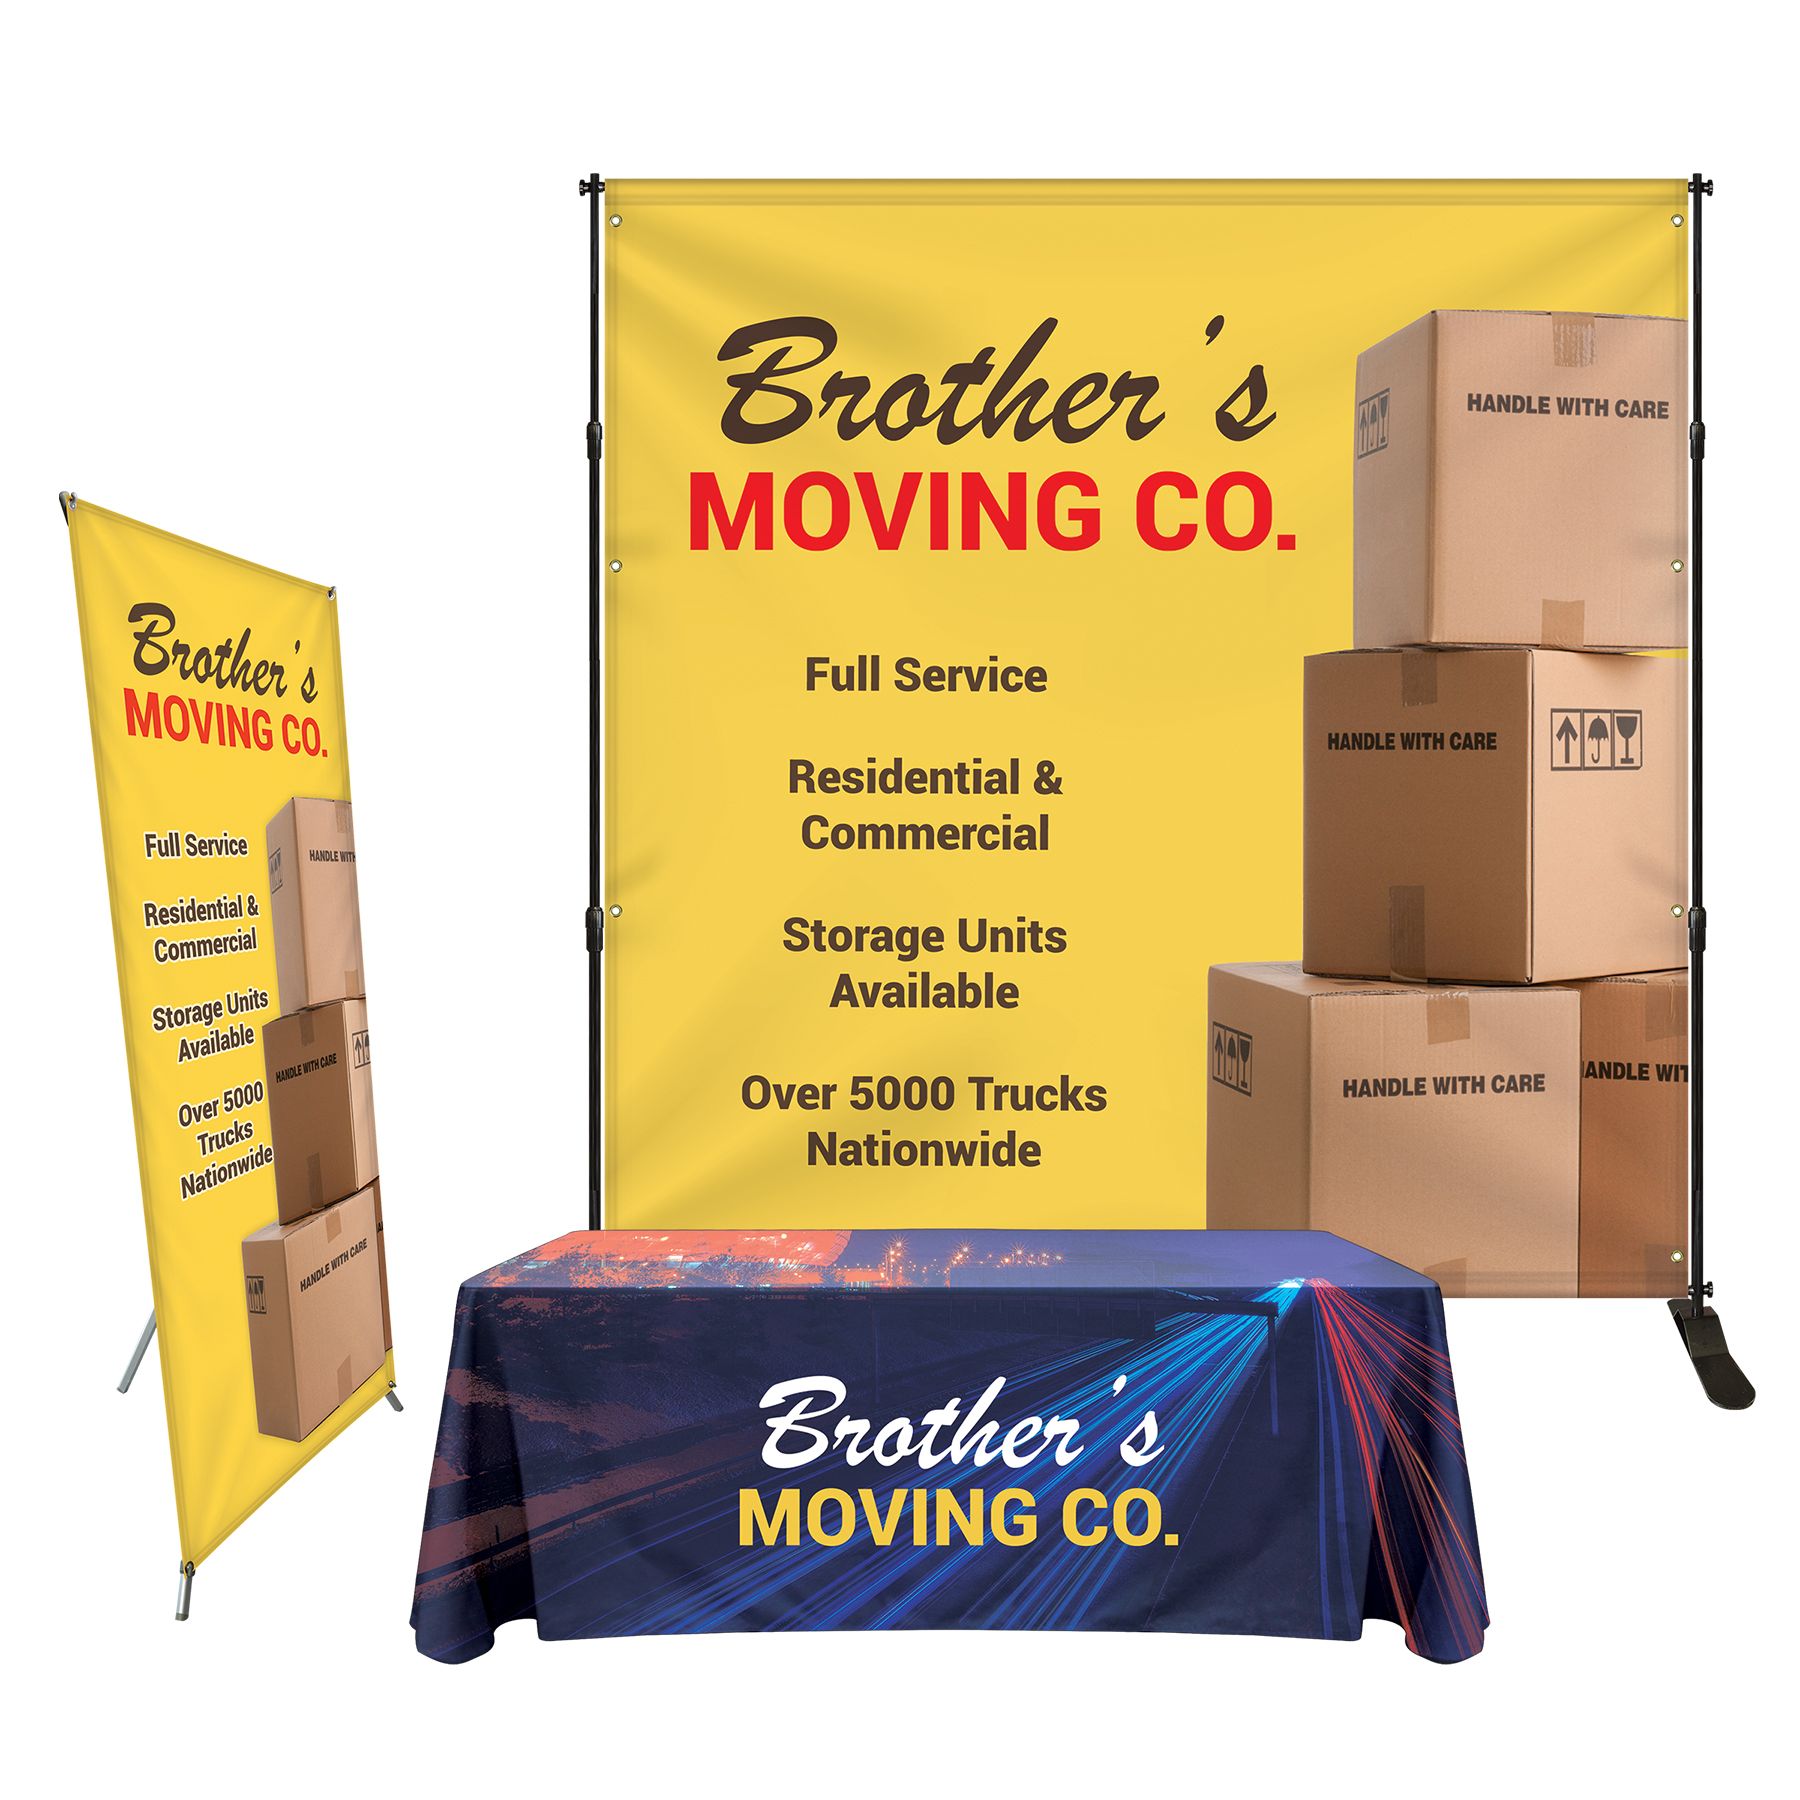 Trade Show Booth Display - Starter Package - Banners, Displays, Table Covers